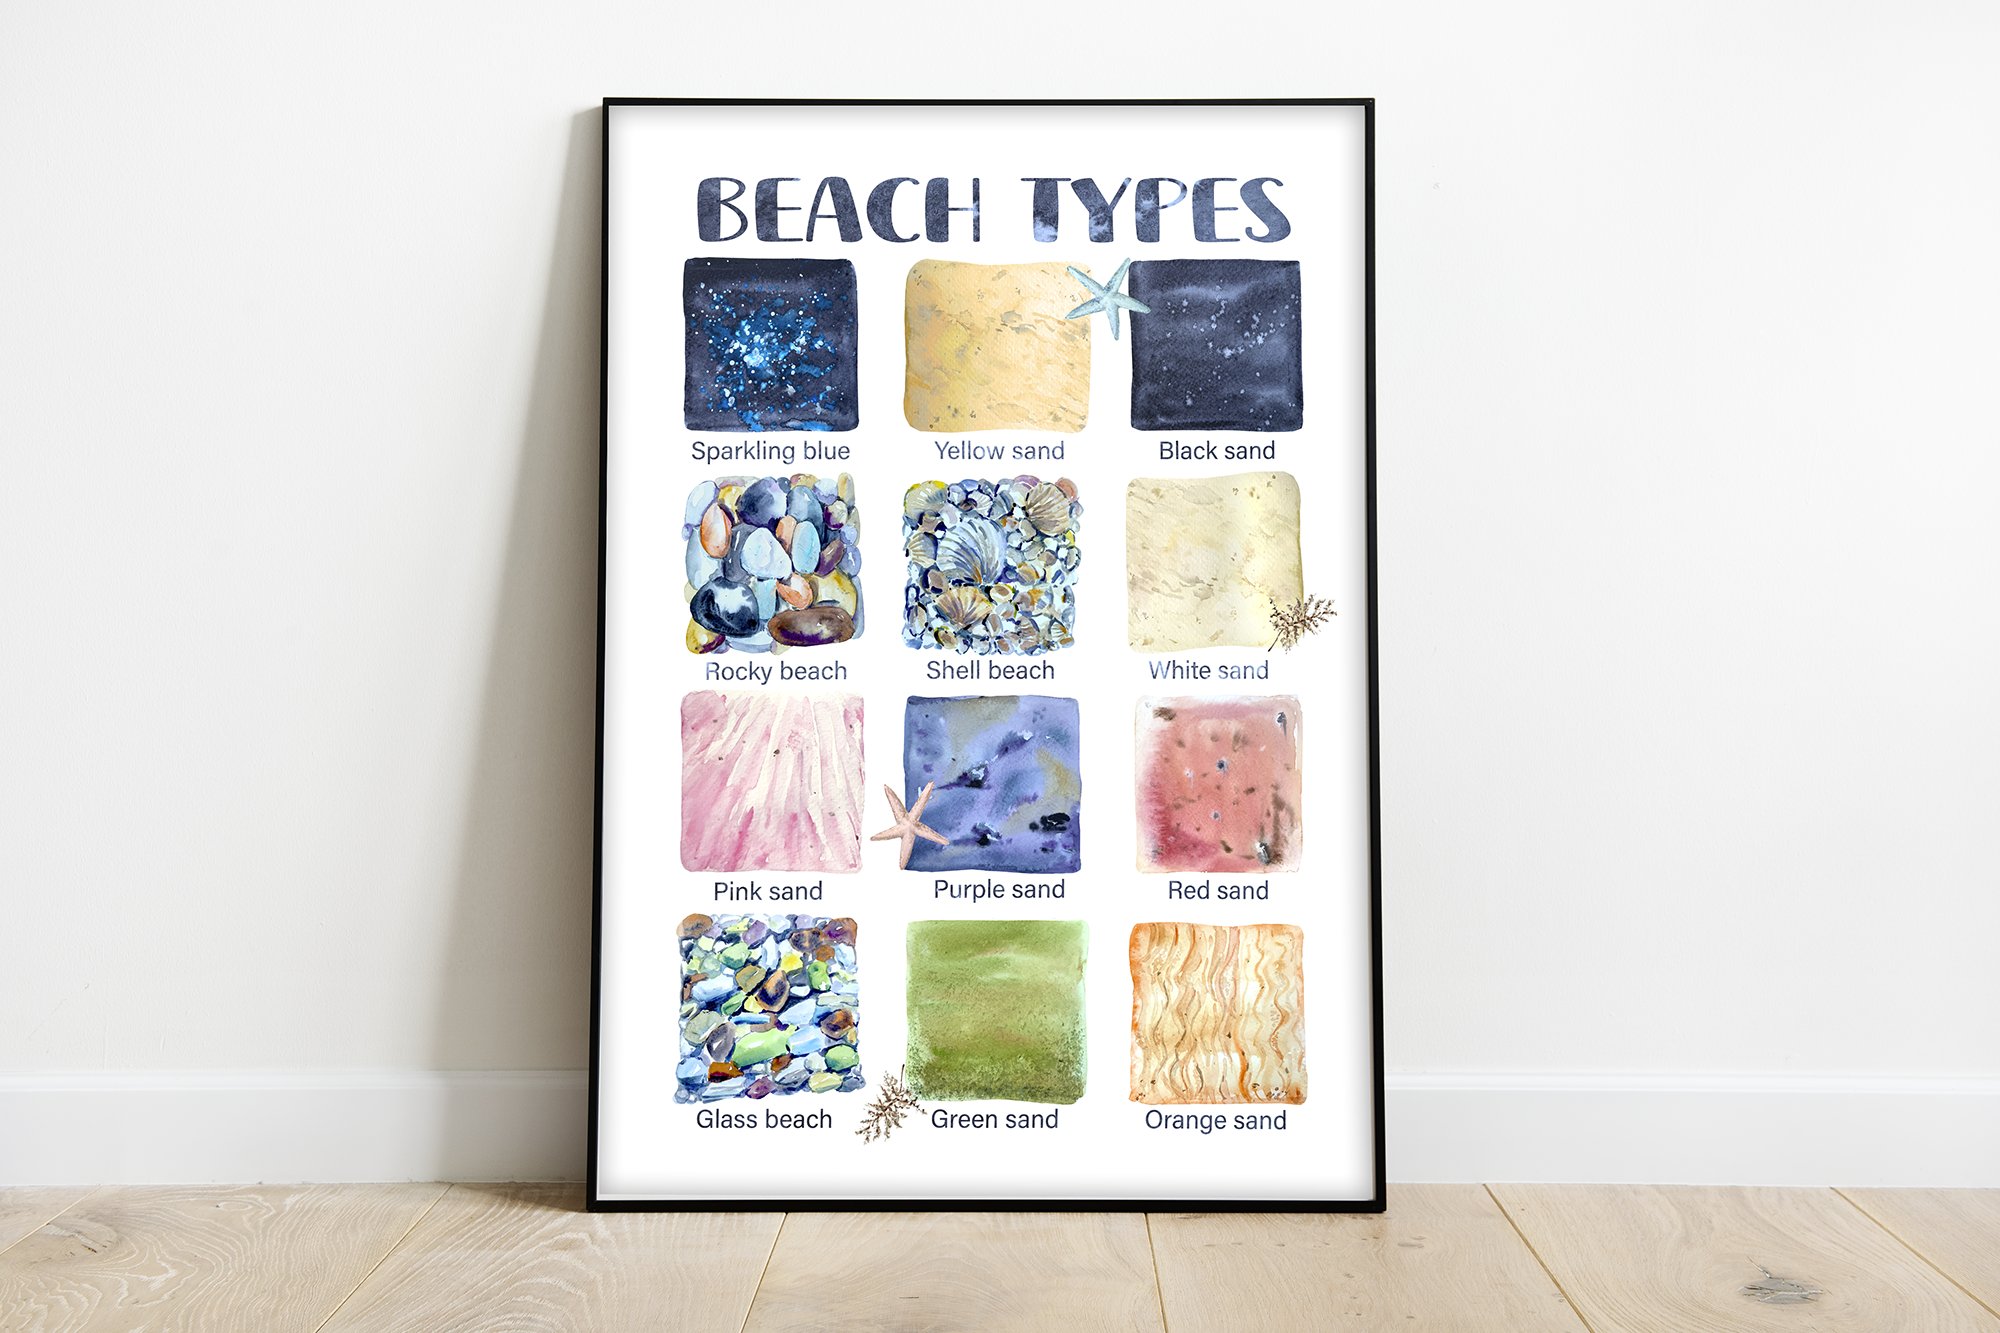 Beach Types - Poster and Cliparts cover image.